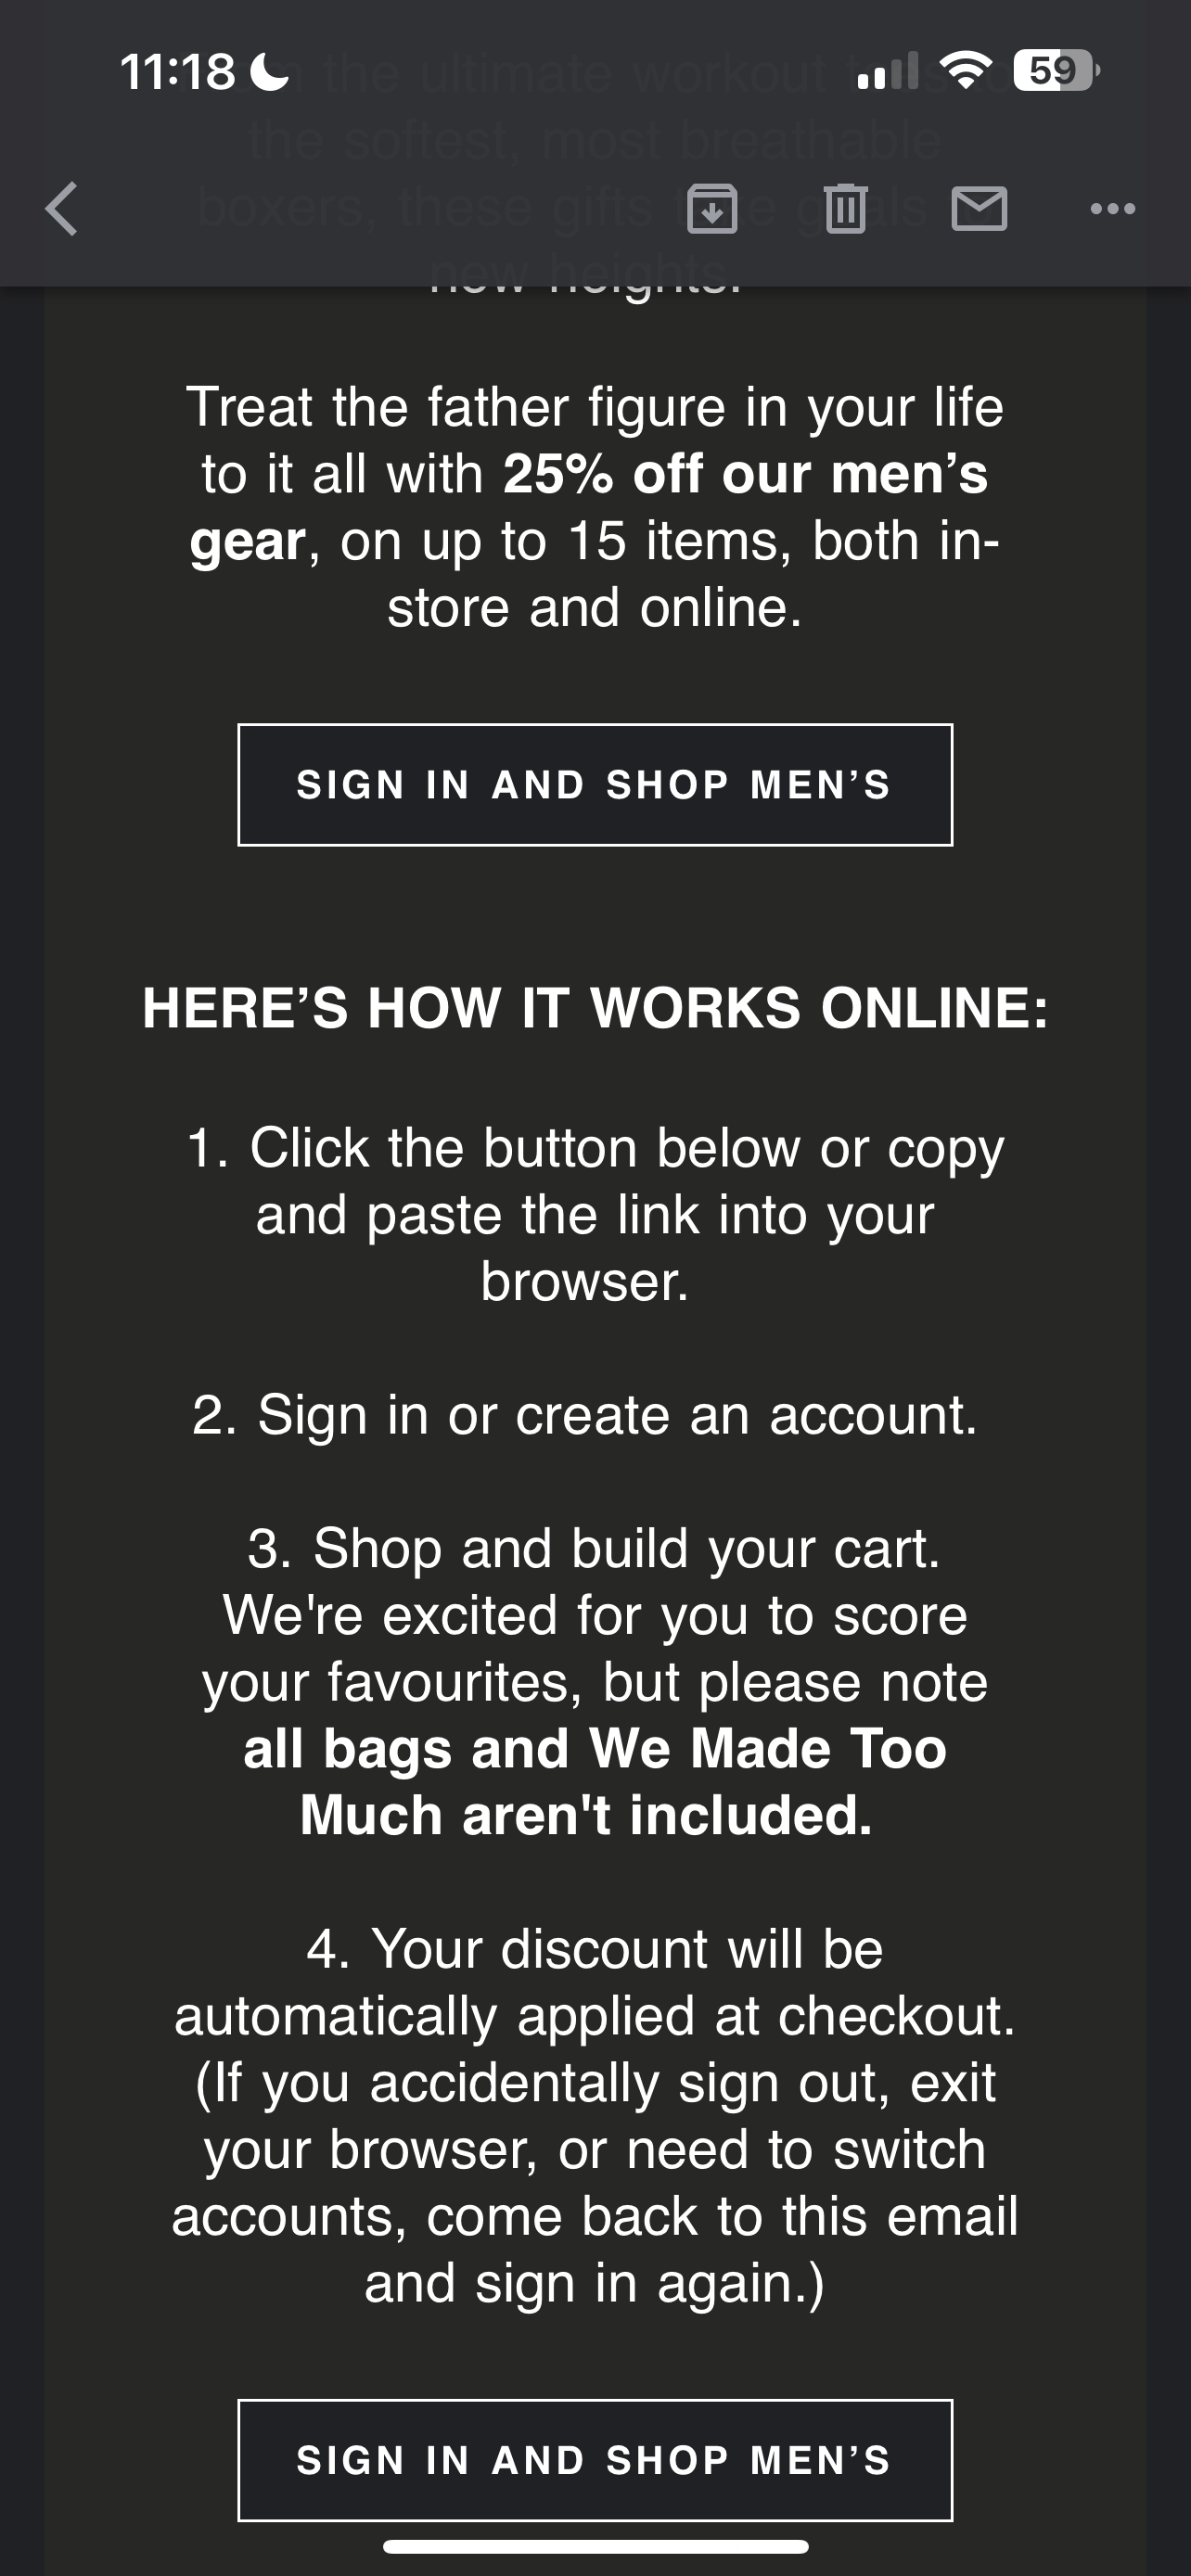 PSA: check your email if you are subscribed to lululemon emails - 25% off up to 15 men’s items